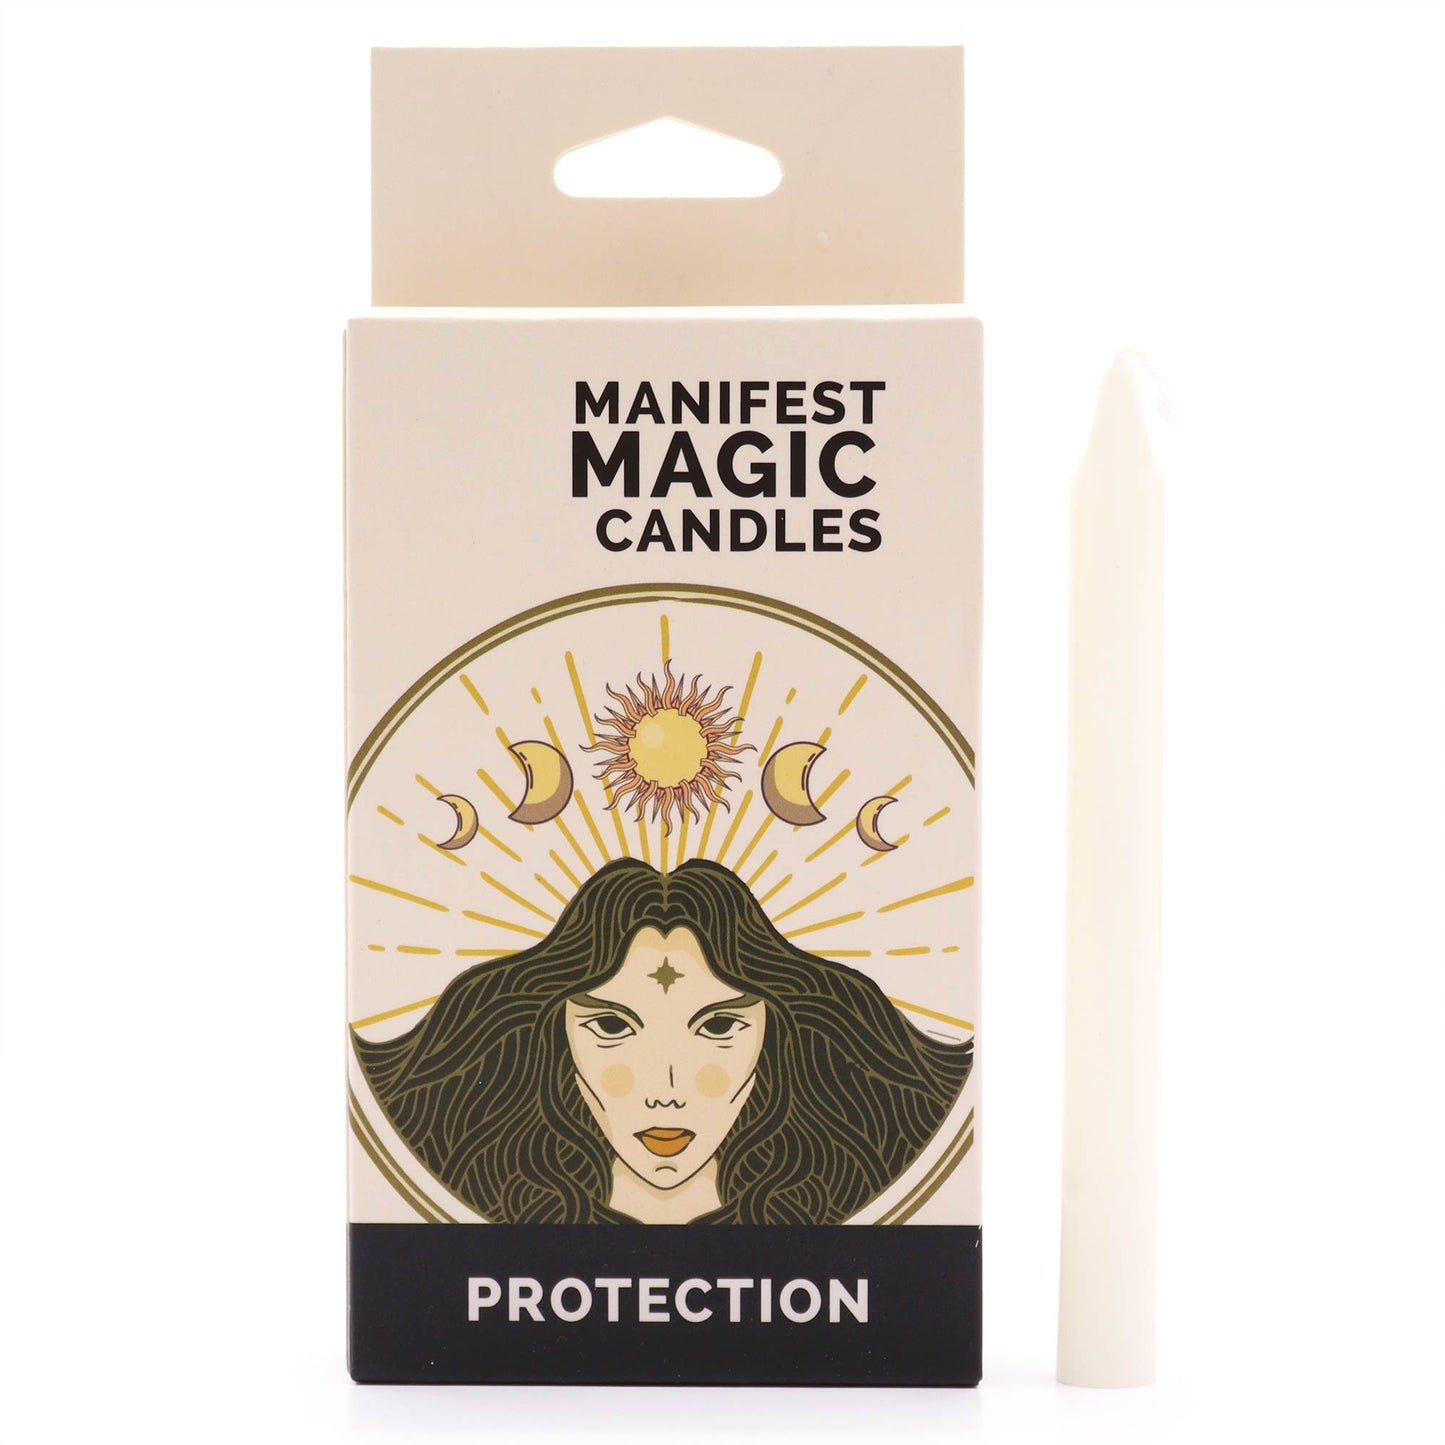 Manifest Magic Candles Ivory White | Set of 12 | Protection | Soy Wax